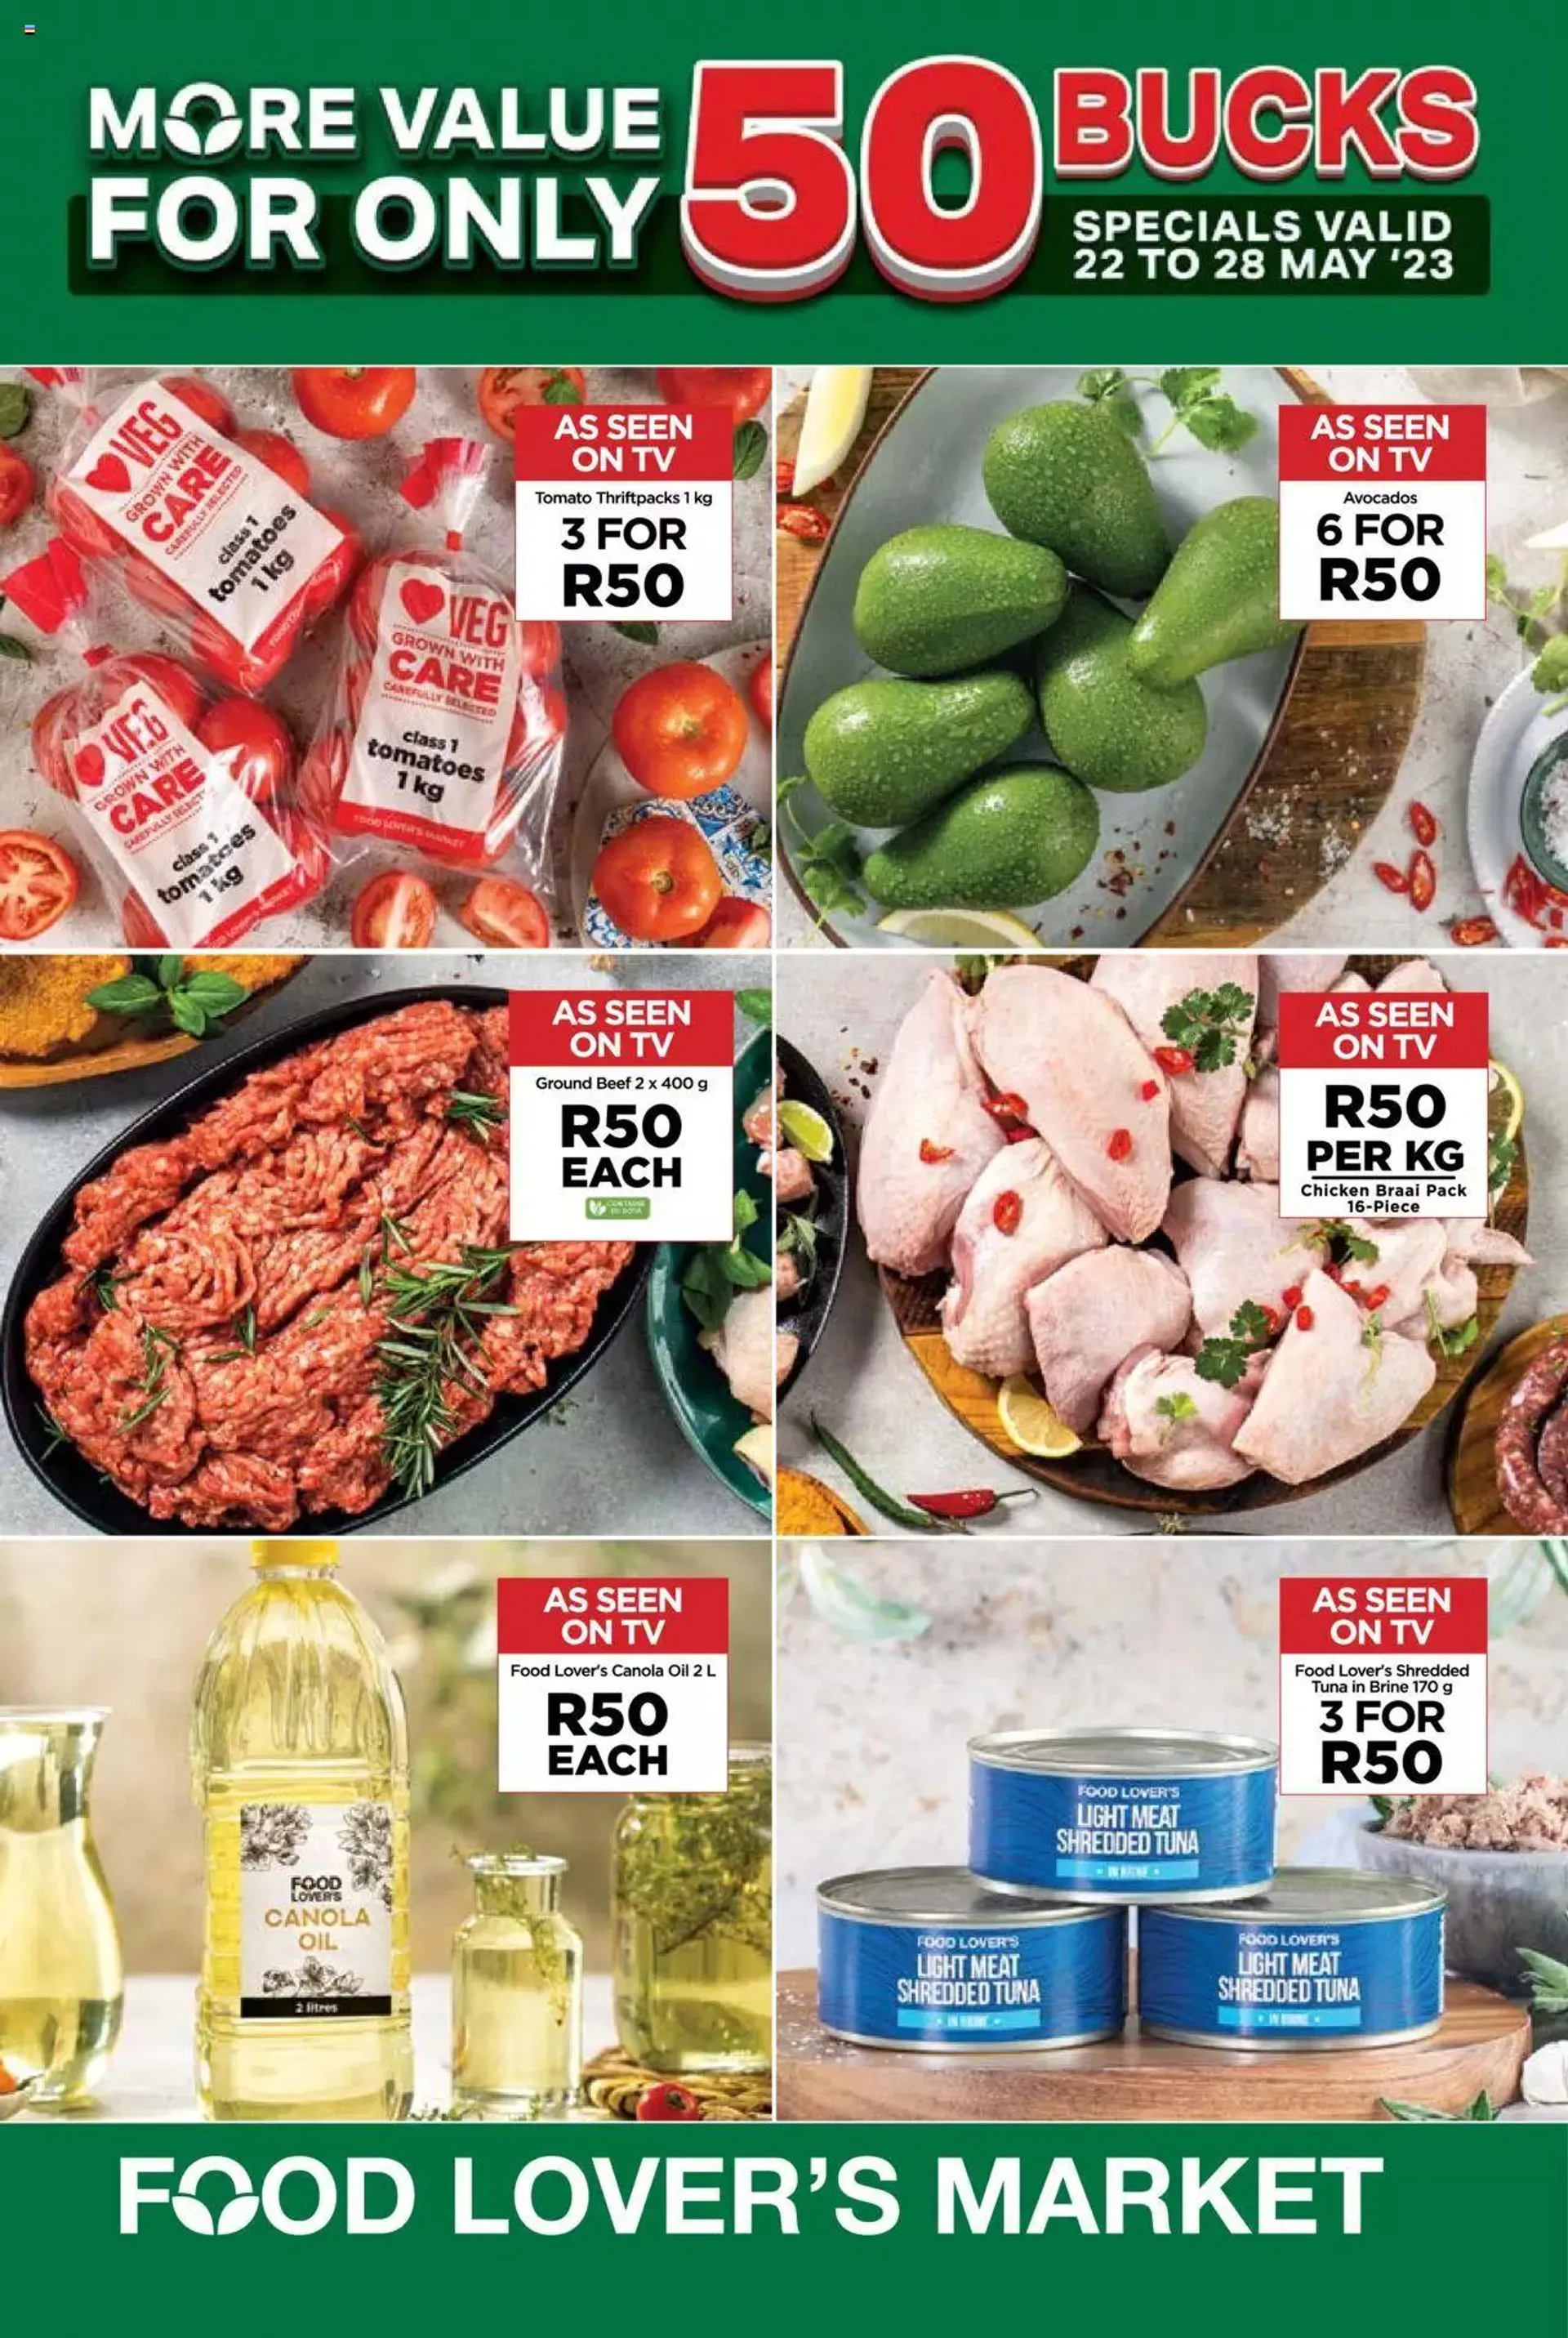 Food Lovers Market Inland Provinces - Weekly Specials - 0